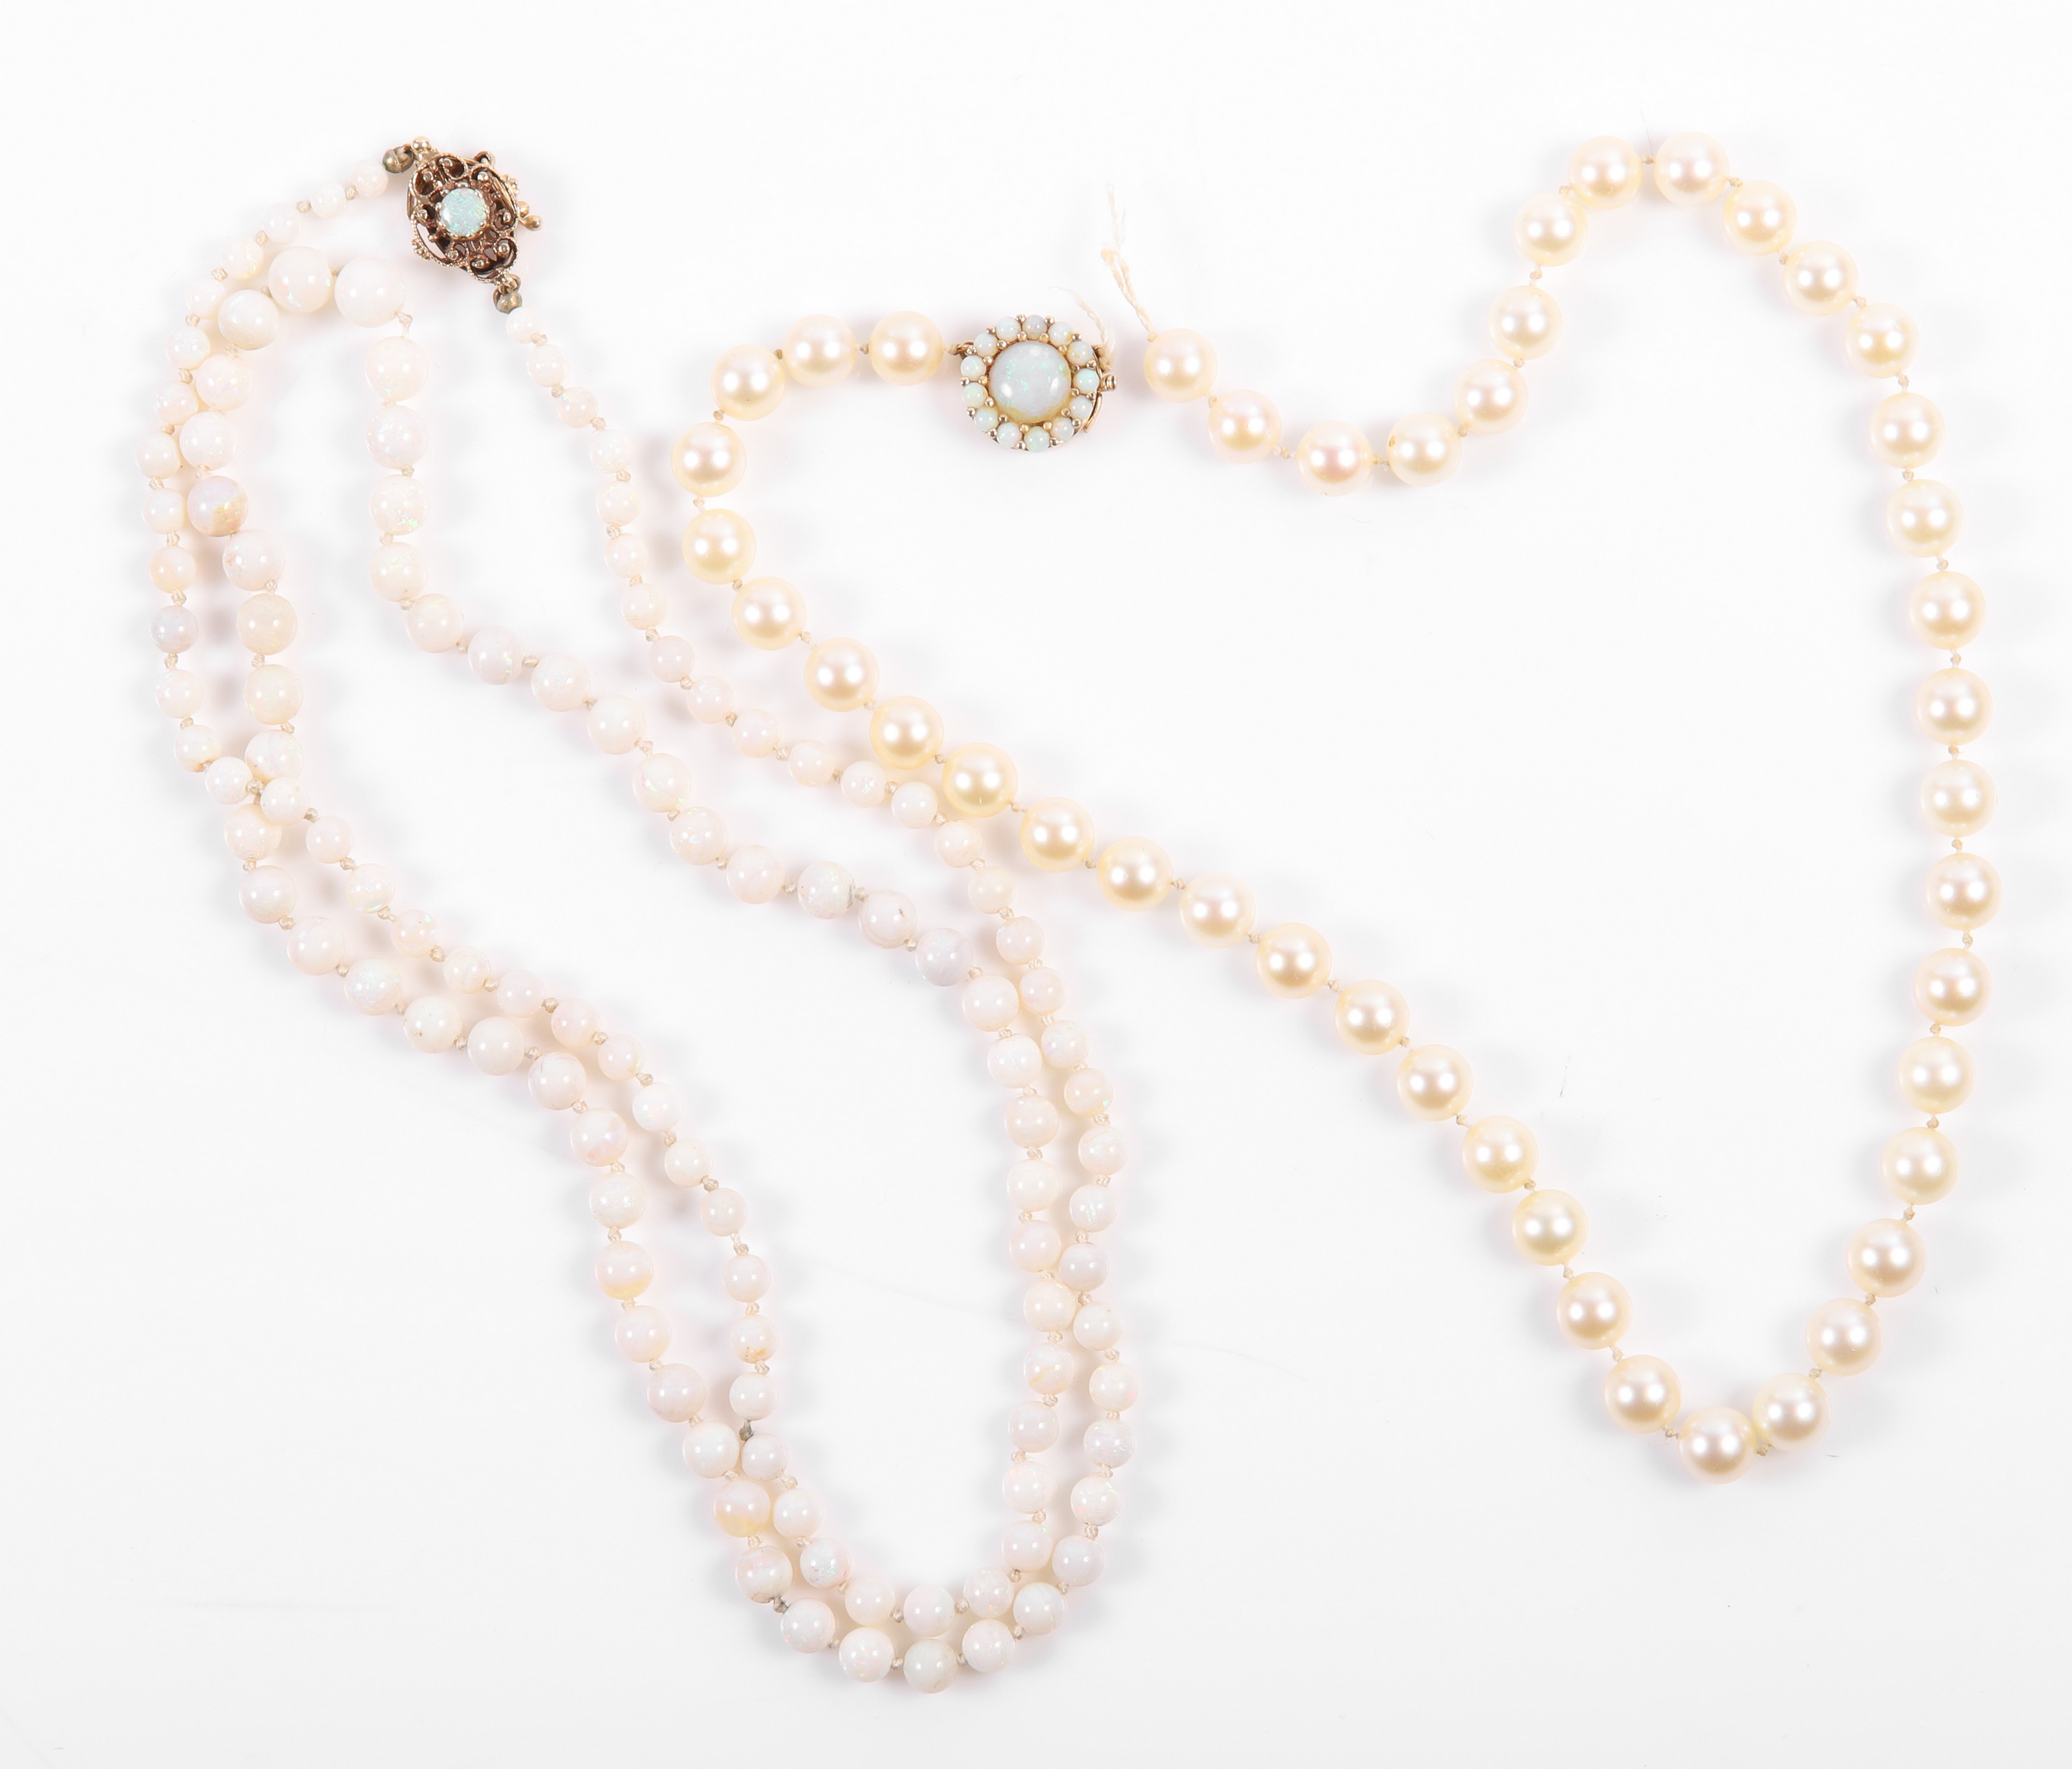 (2) Pearl and Opal bead necklace,